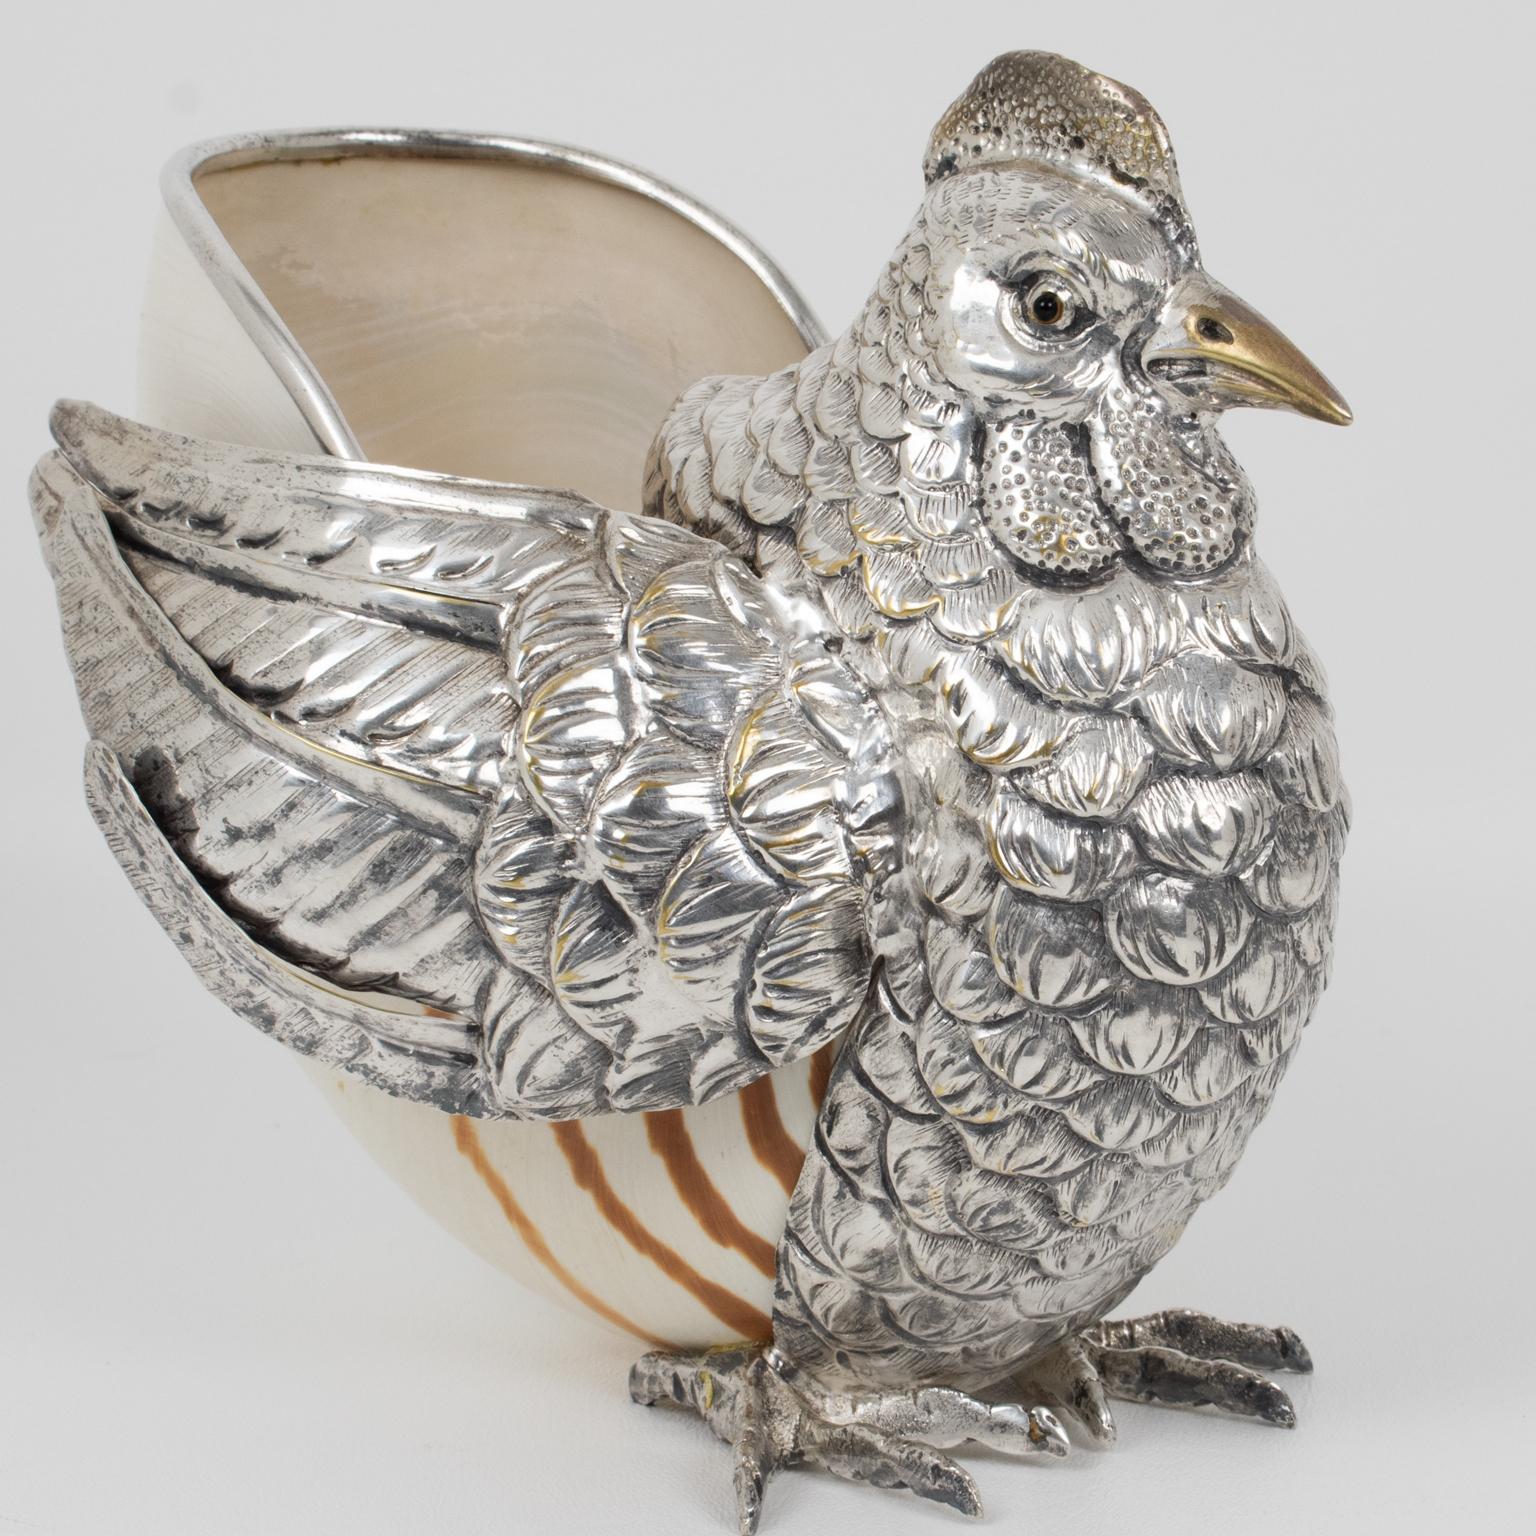 This beautiful massive silver plate and shell hen bird was designed and hand-crafted by Italian artist Gabriella Binazzi (attributed to). You can hear the ocean in this lovely Binazzi object of art. The hen head, plumage, and feet are made of silver